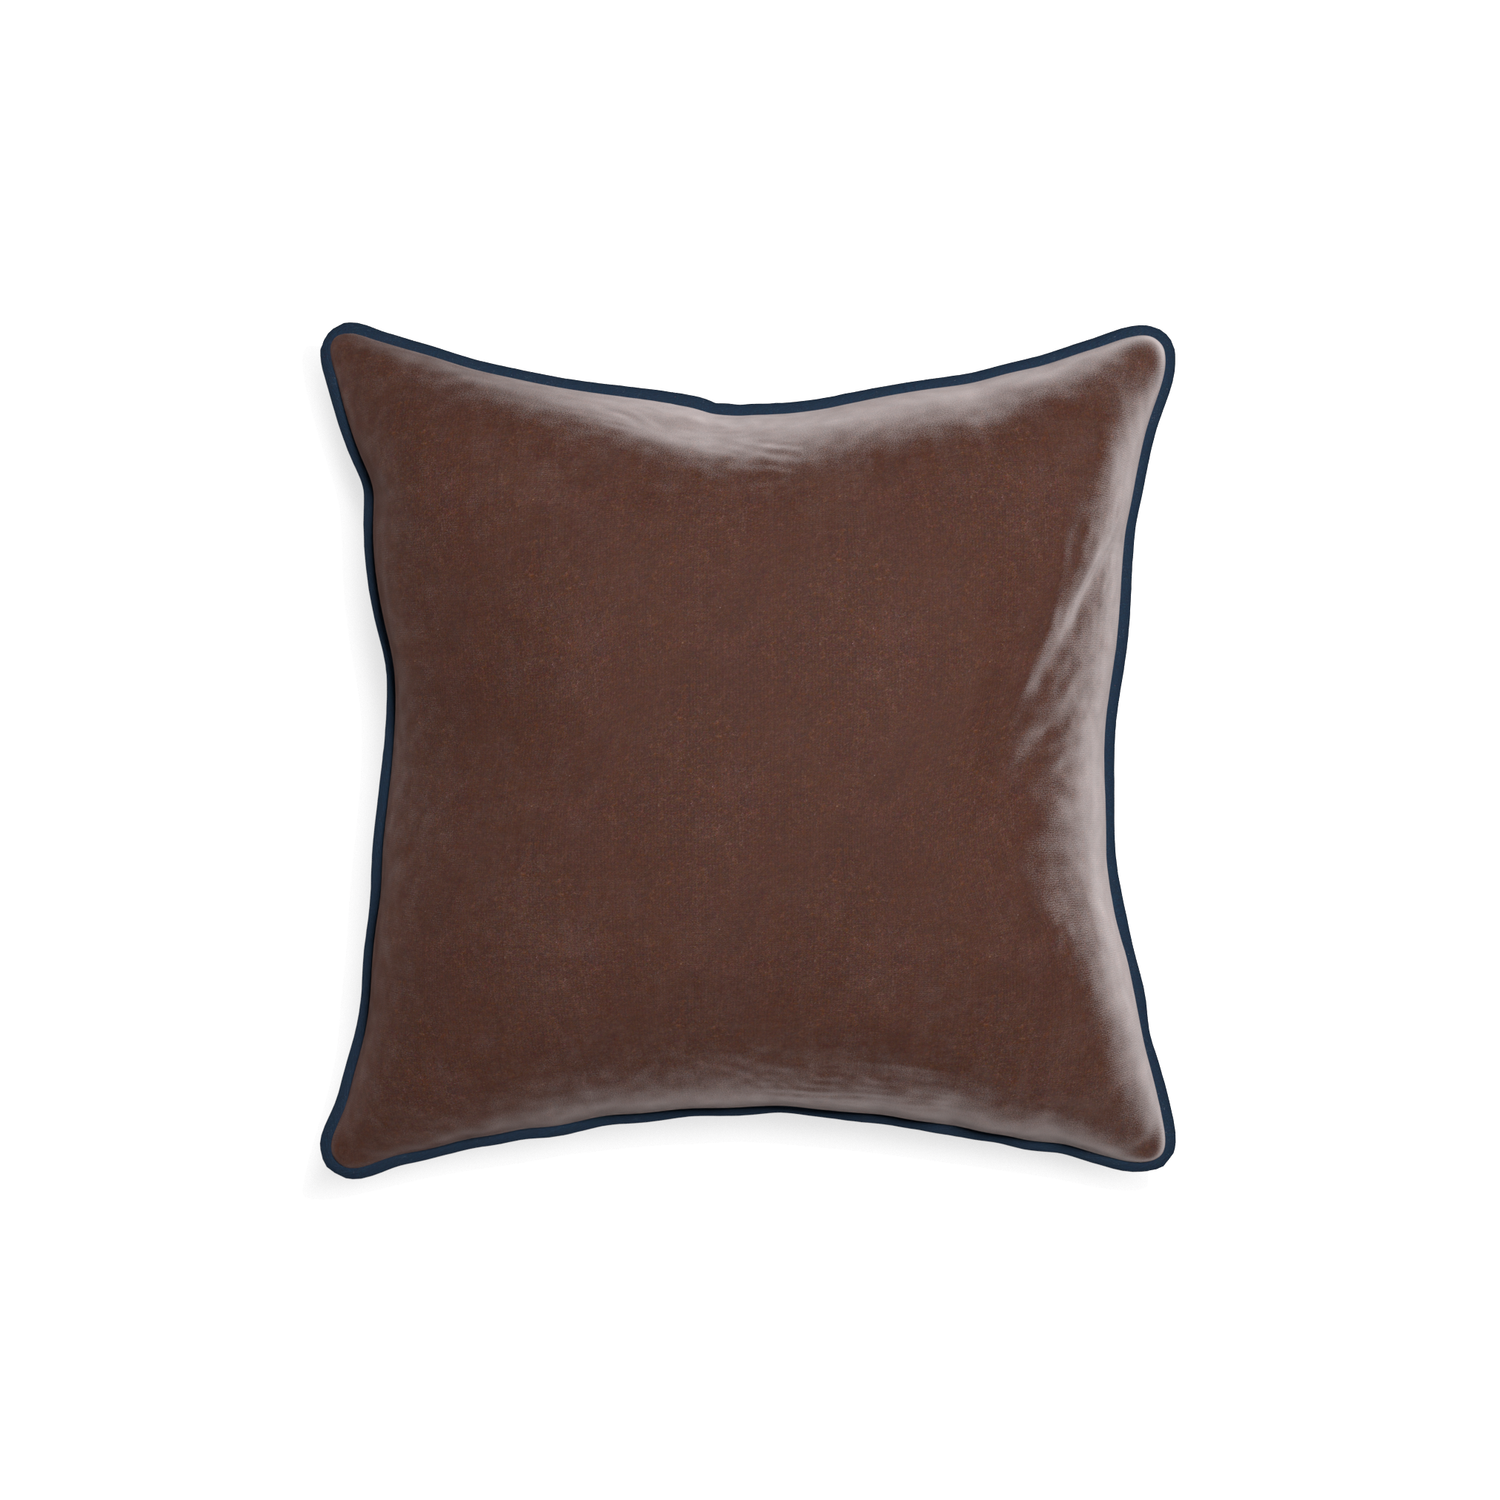 18-square walnut velvet custom brownpillow with c piping on white background